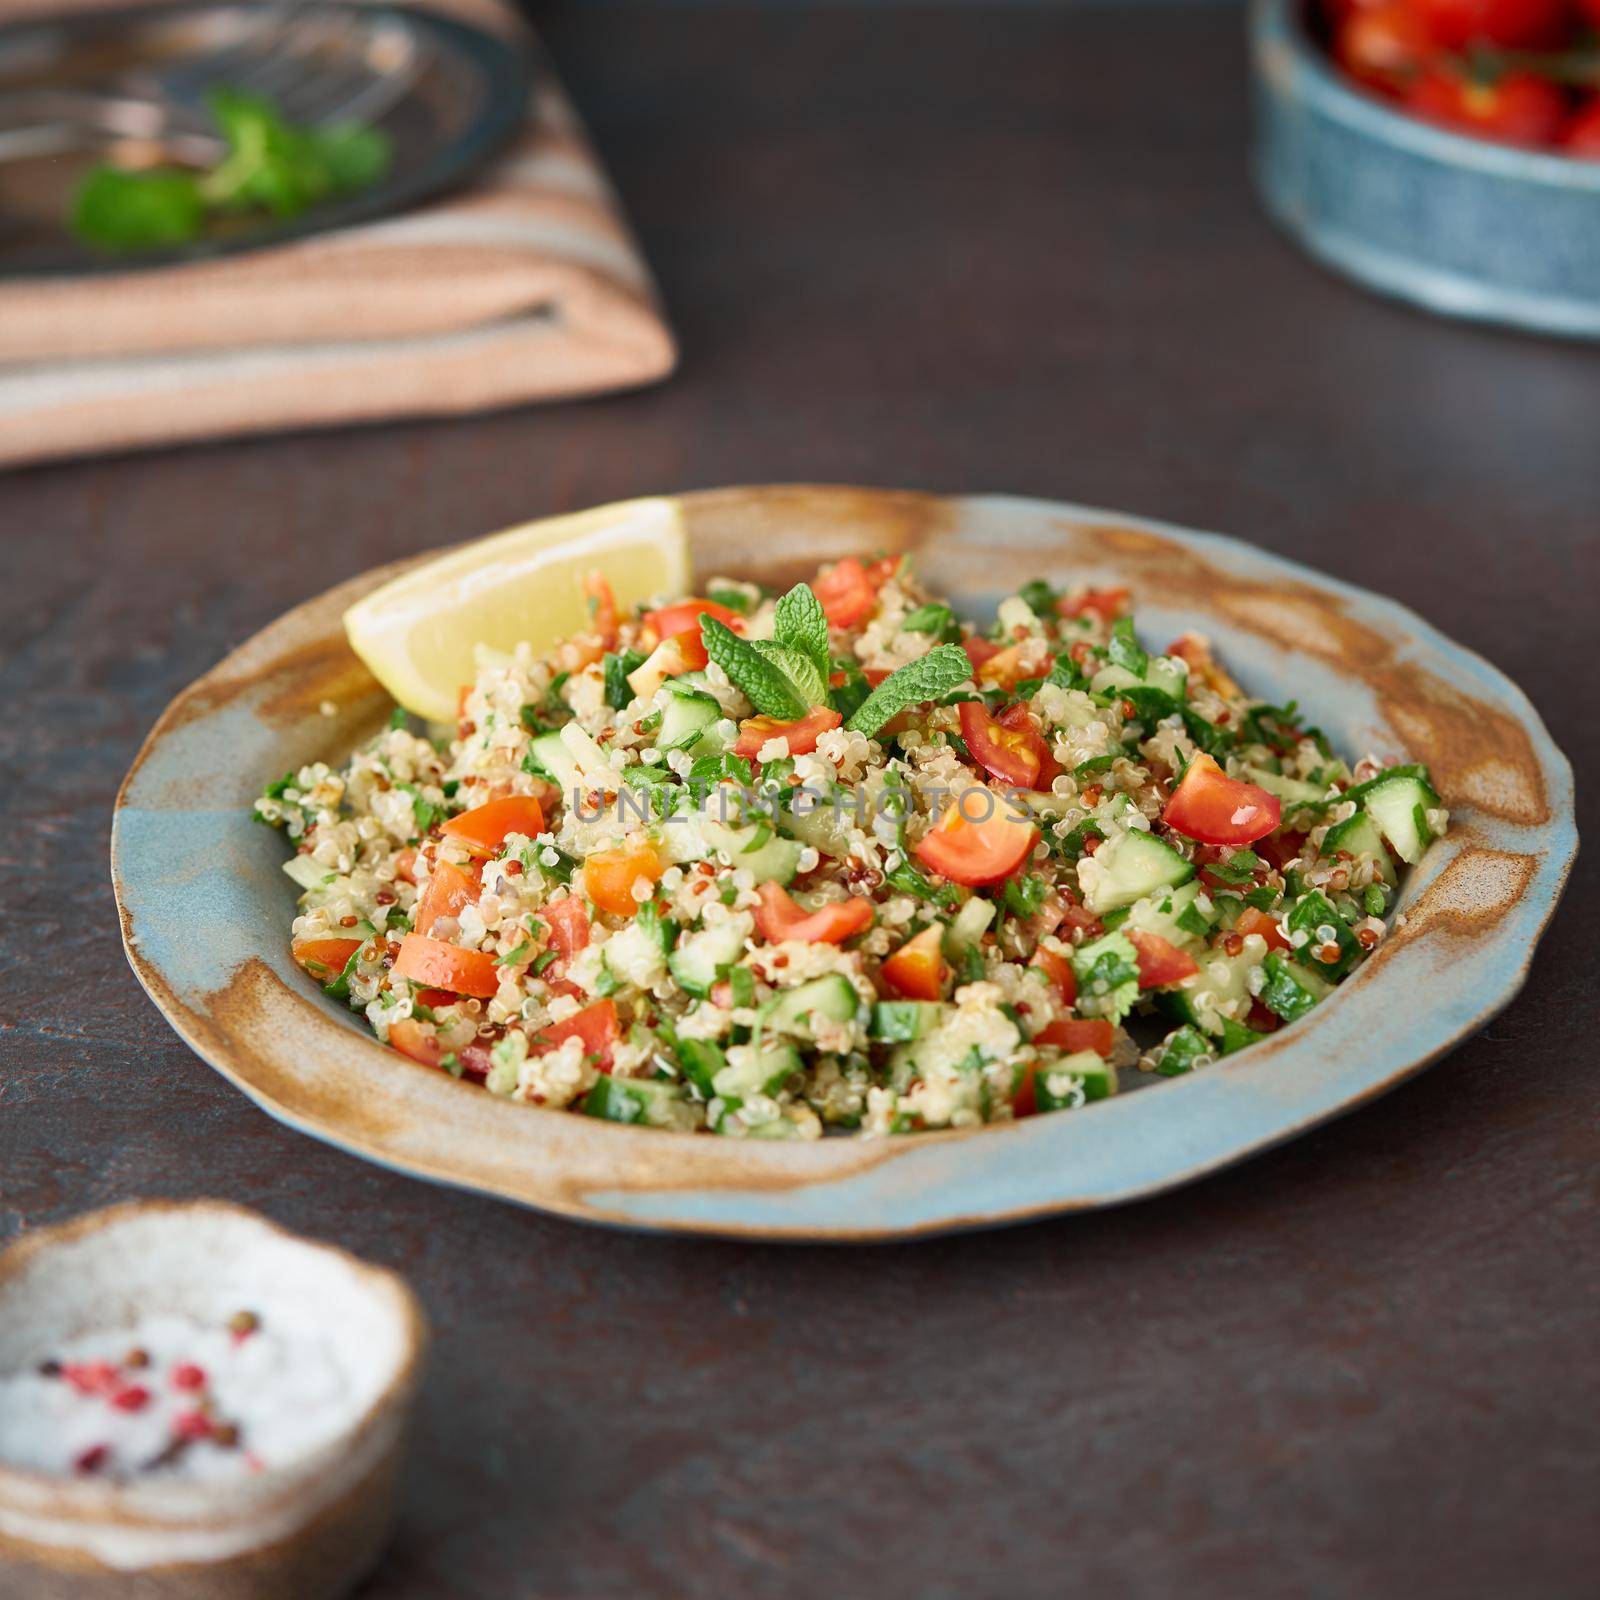 Tabbouleh salad with quinoa. Eastern food with vegetables mix, vegan diet. Side view, old plate